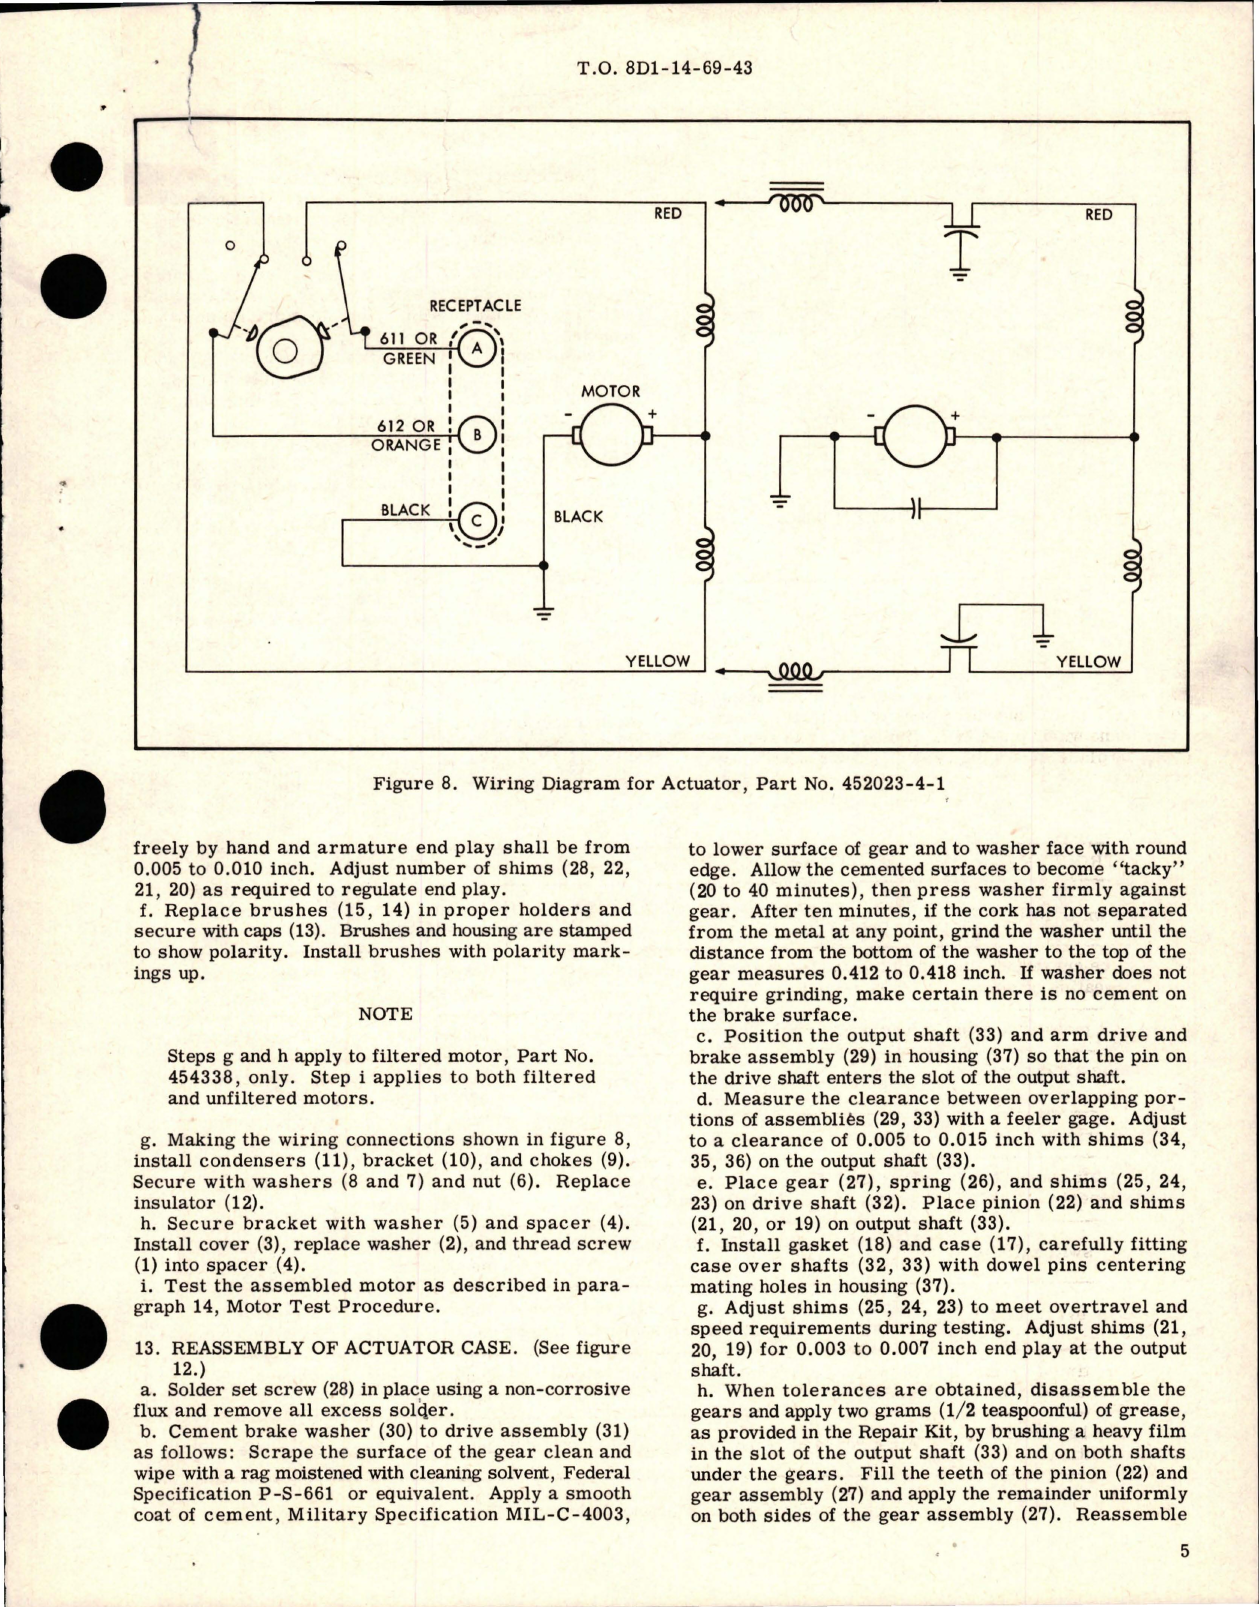 Sample page 5 from AirCorps Library document: Overhaul with Parts Breakdown for Geneva-Loc Actuator - Series 108